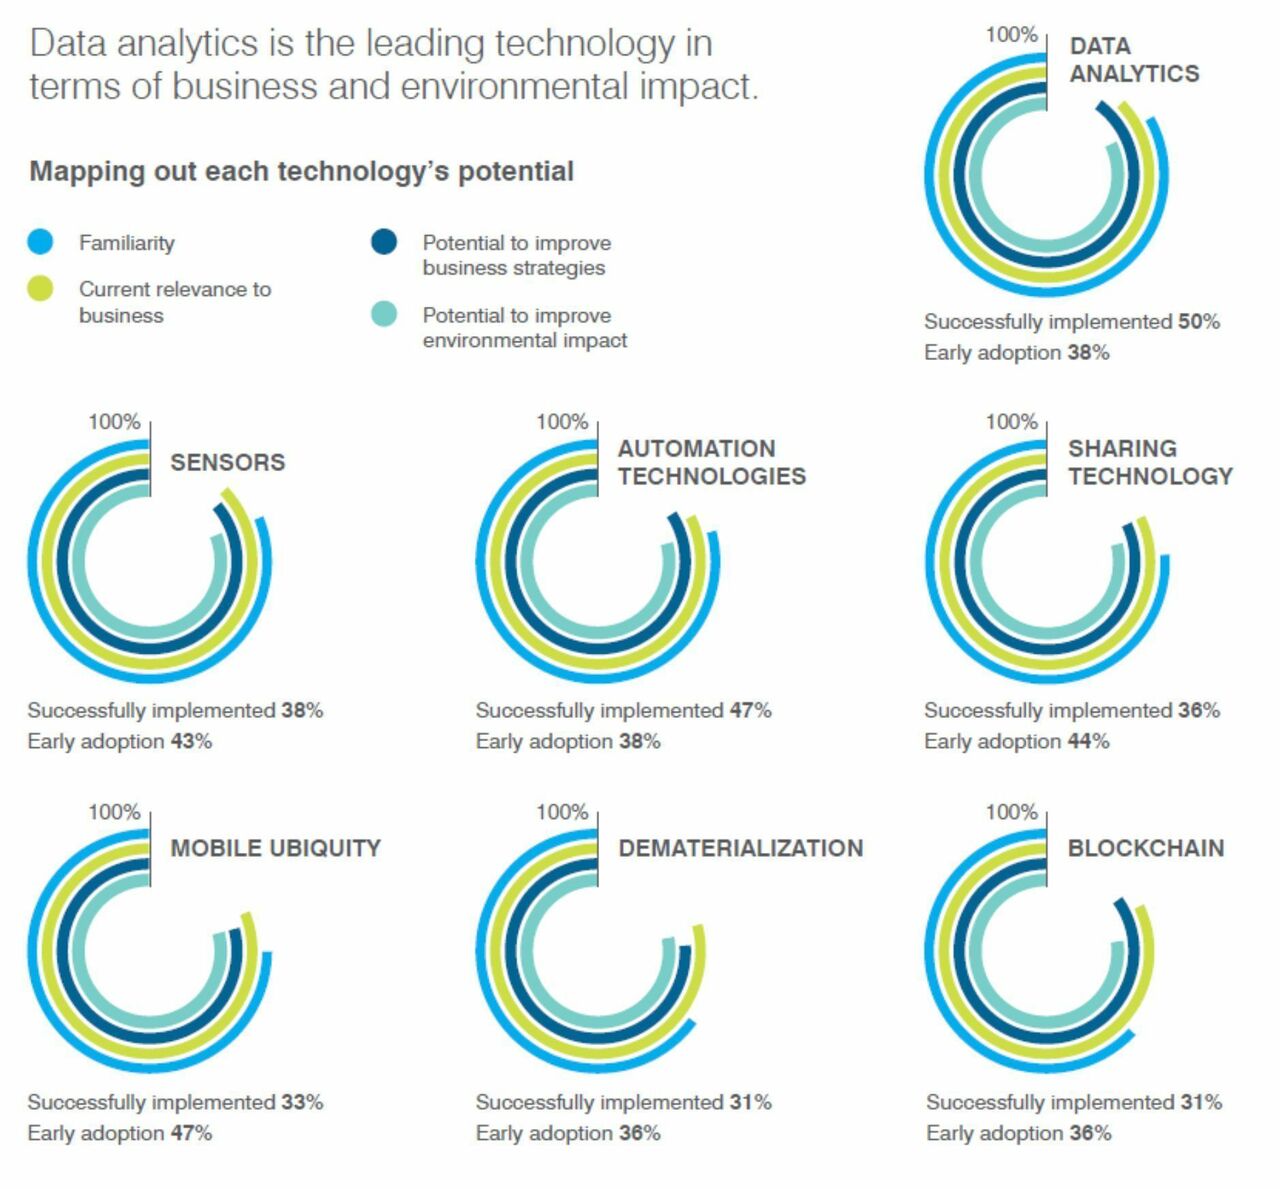 As the business world enters the 4th Industrial Revolution, the environmental community has been heading into our own complementary 4th Wave of environmentalism. Link >> https://buff.ly/2IZXhW2 @wef via @antgrasso #Analytics #Industry40 #DigitalTransformation #Tech #Innovation https://t.co/efkQPQQCJS